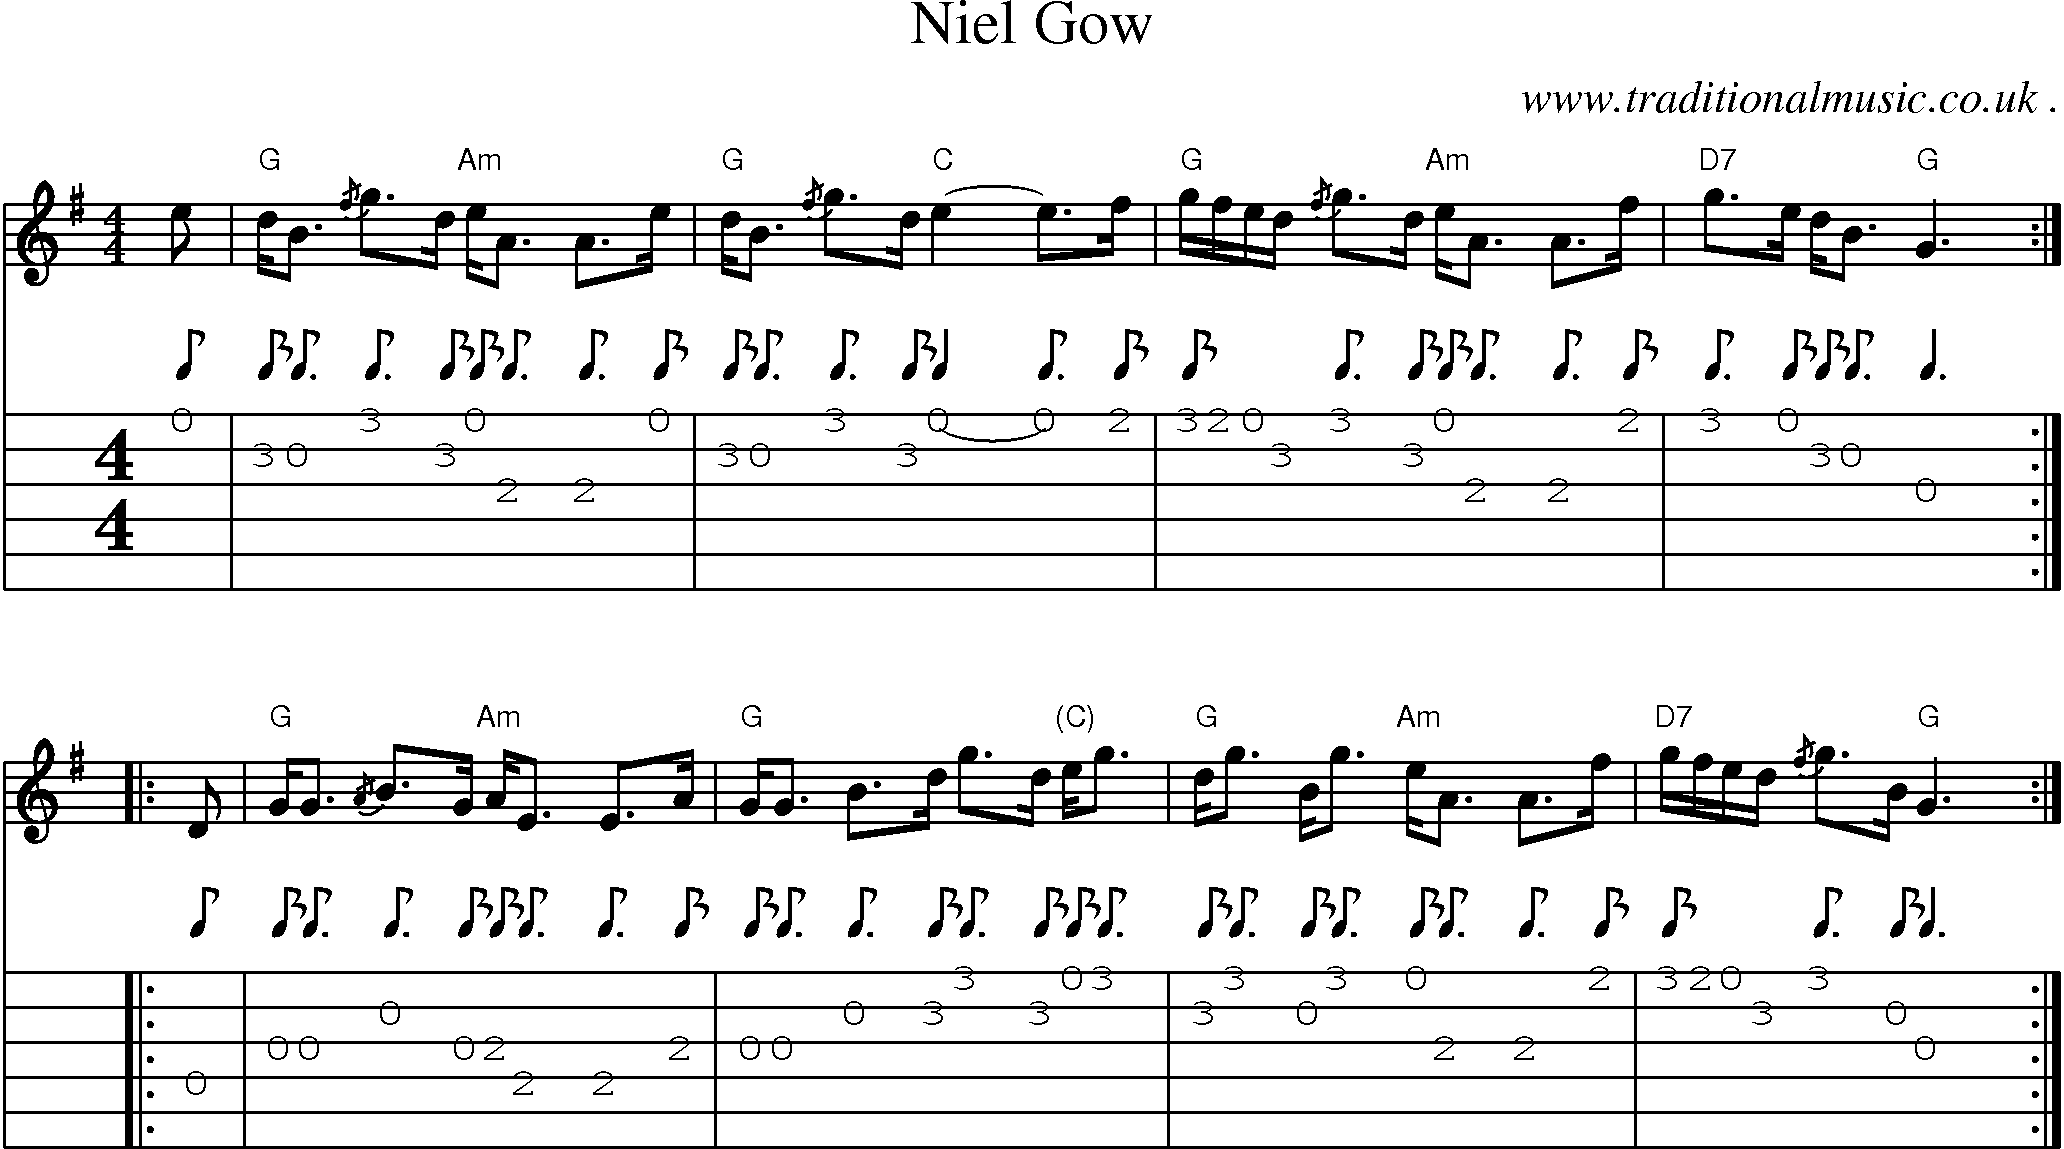 Sheet-music  score, Chords and Guitar Tabs for Niel Gow